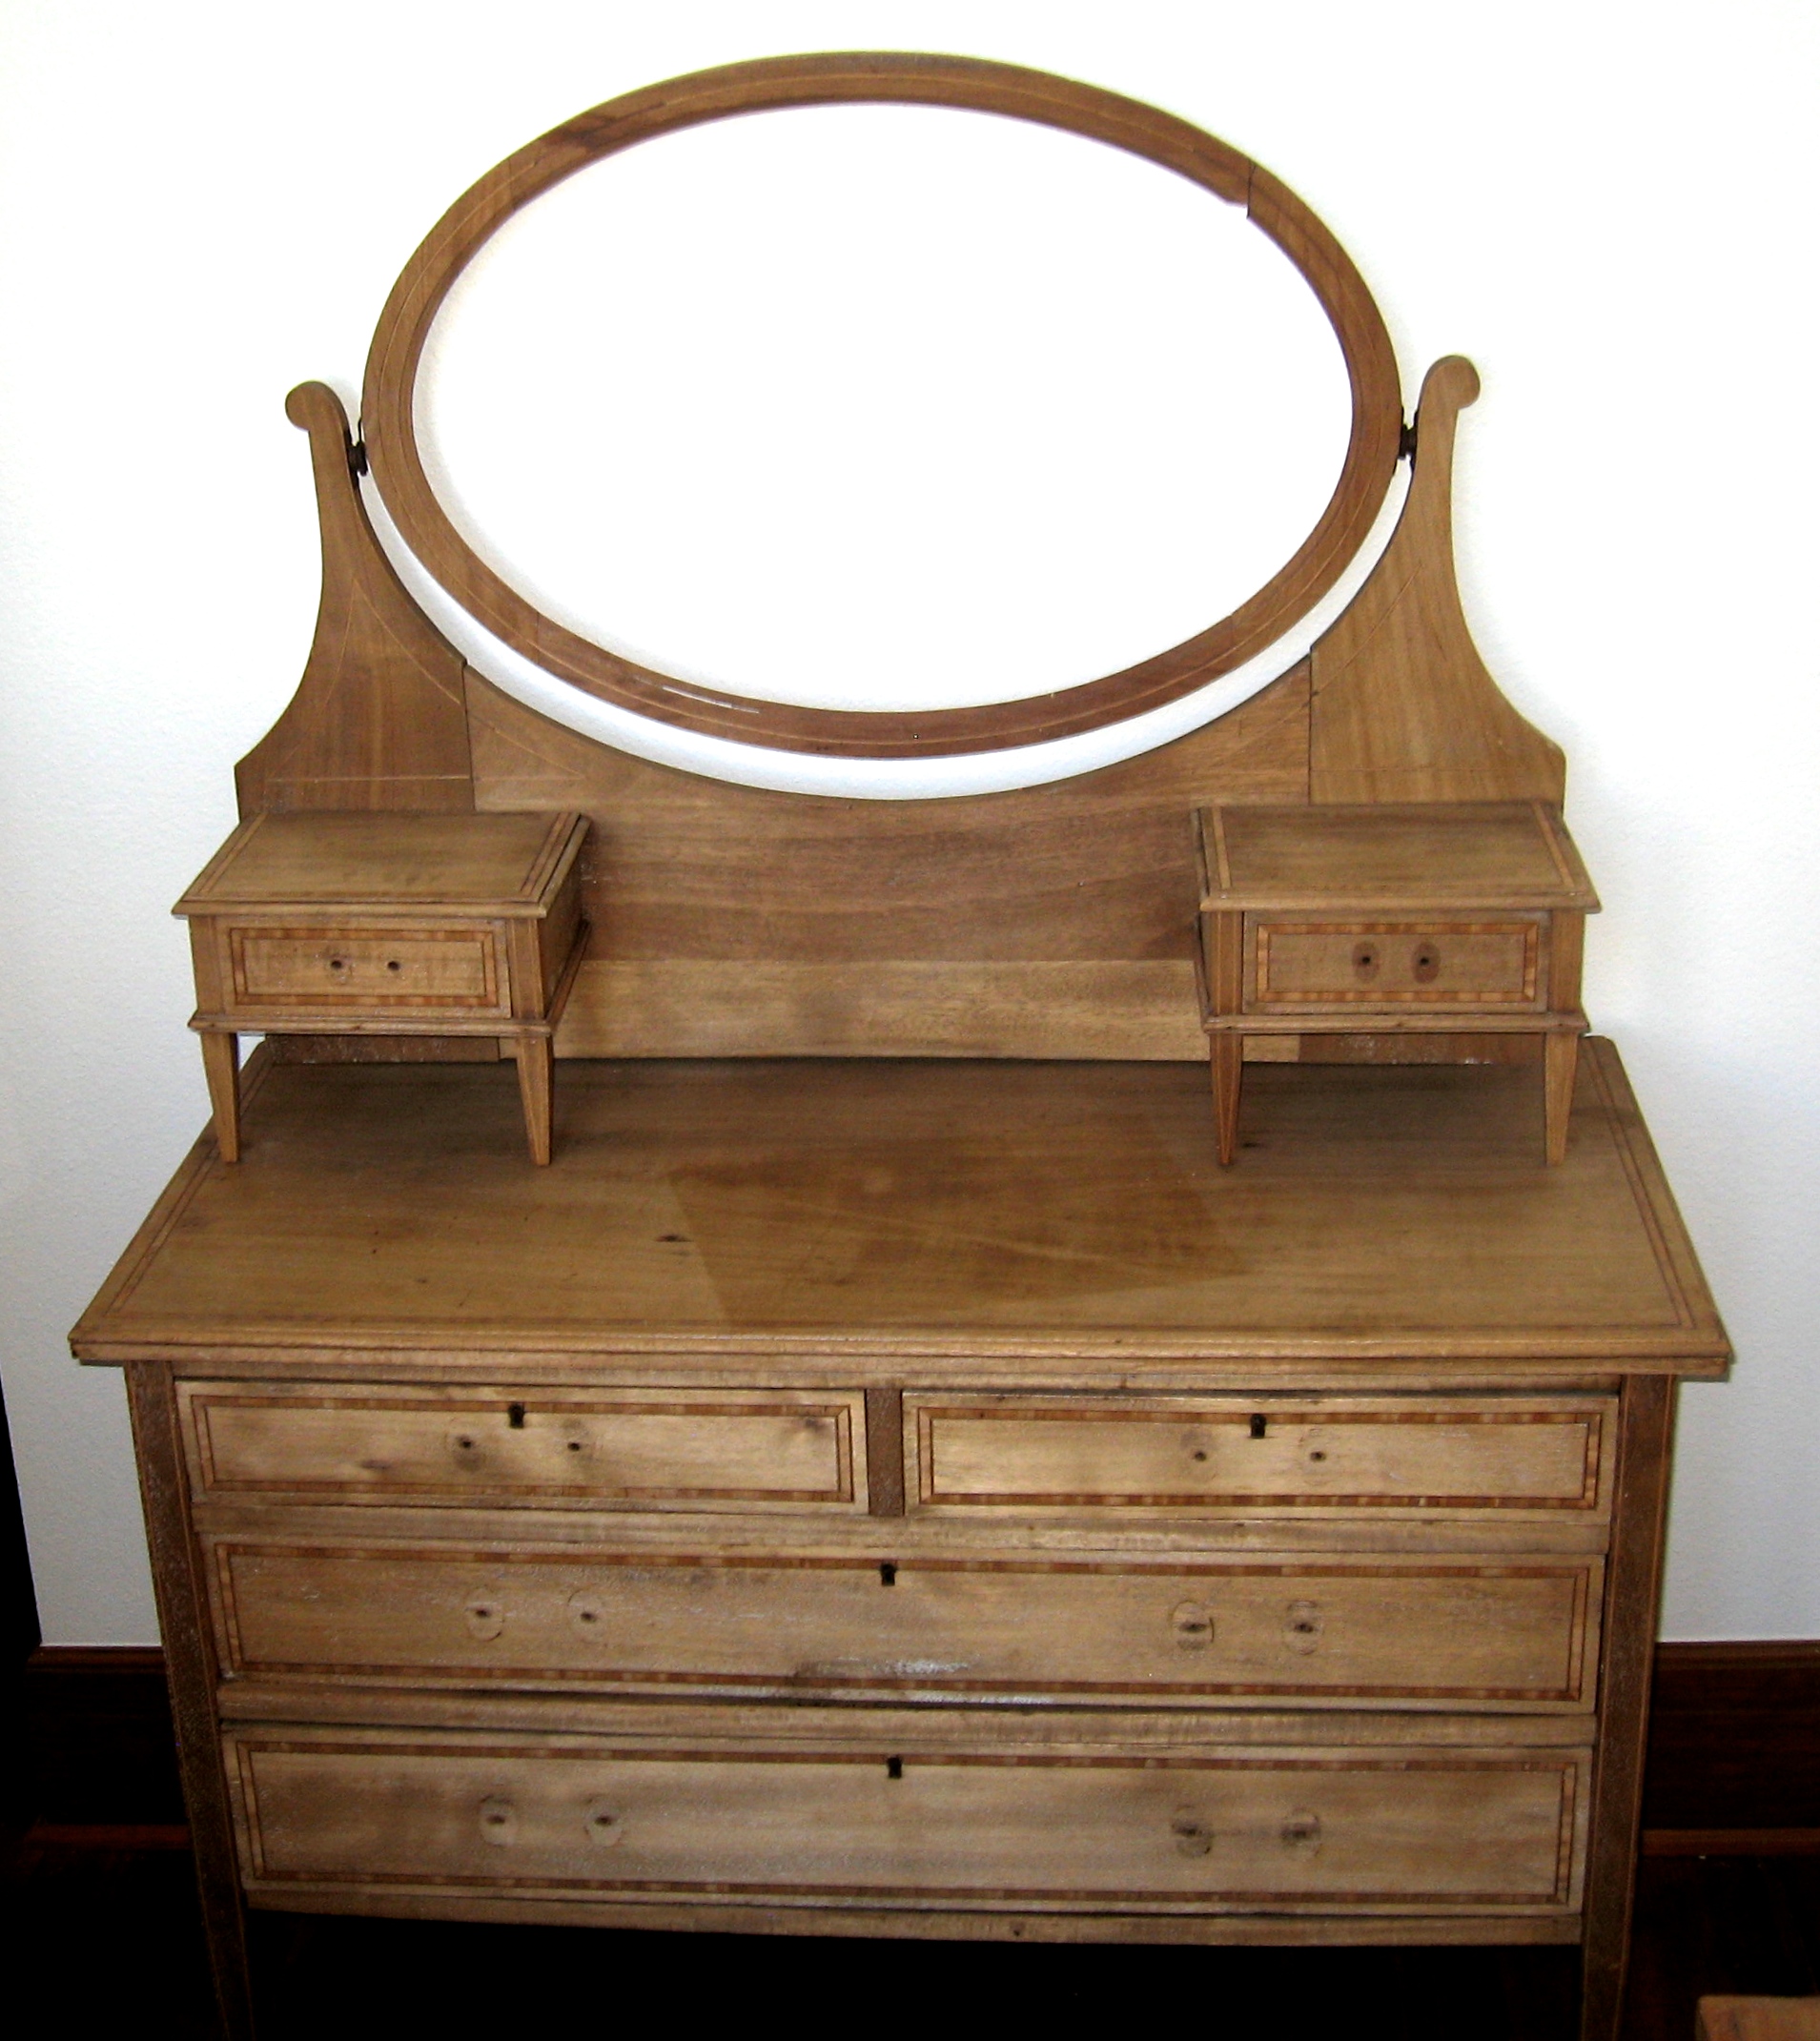 19th Century English 4-Drawer Dresser (Has been stripped & Ready to Re-finish) - (We Will Restore to Your Specifications)